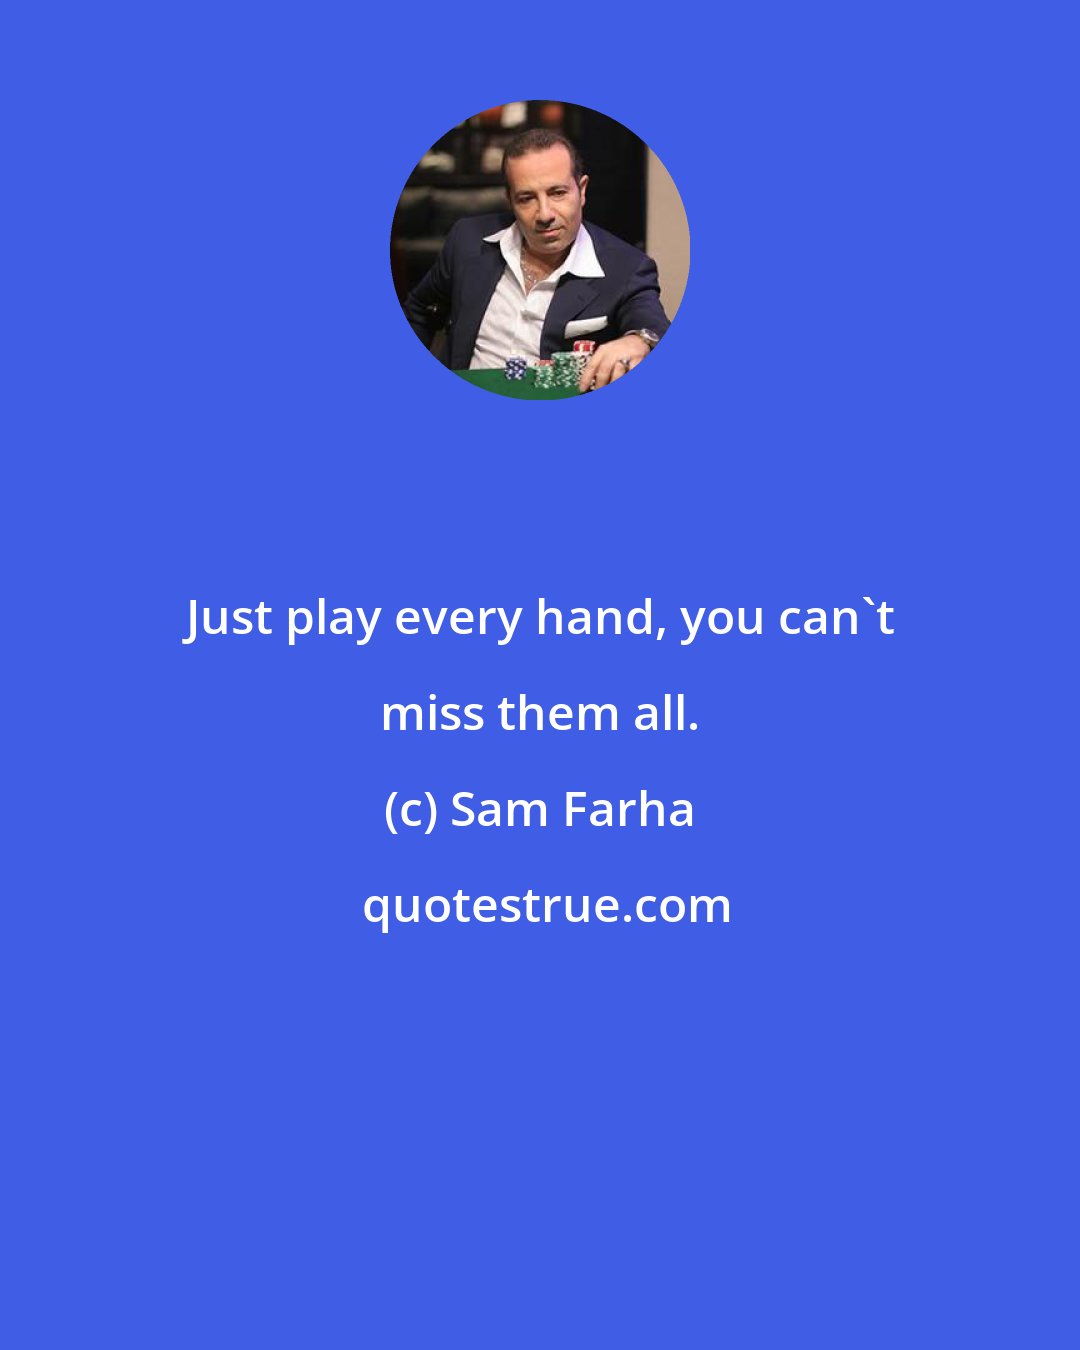 Sam Farha: Just play every hand, you can't miss them all.